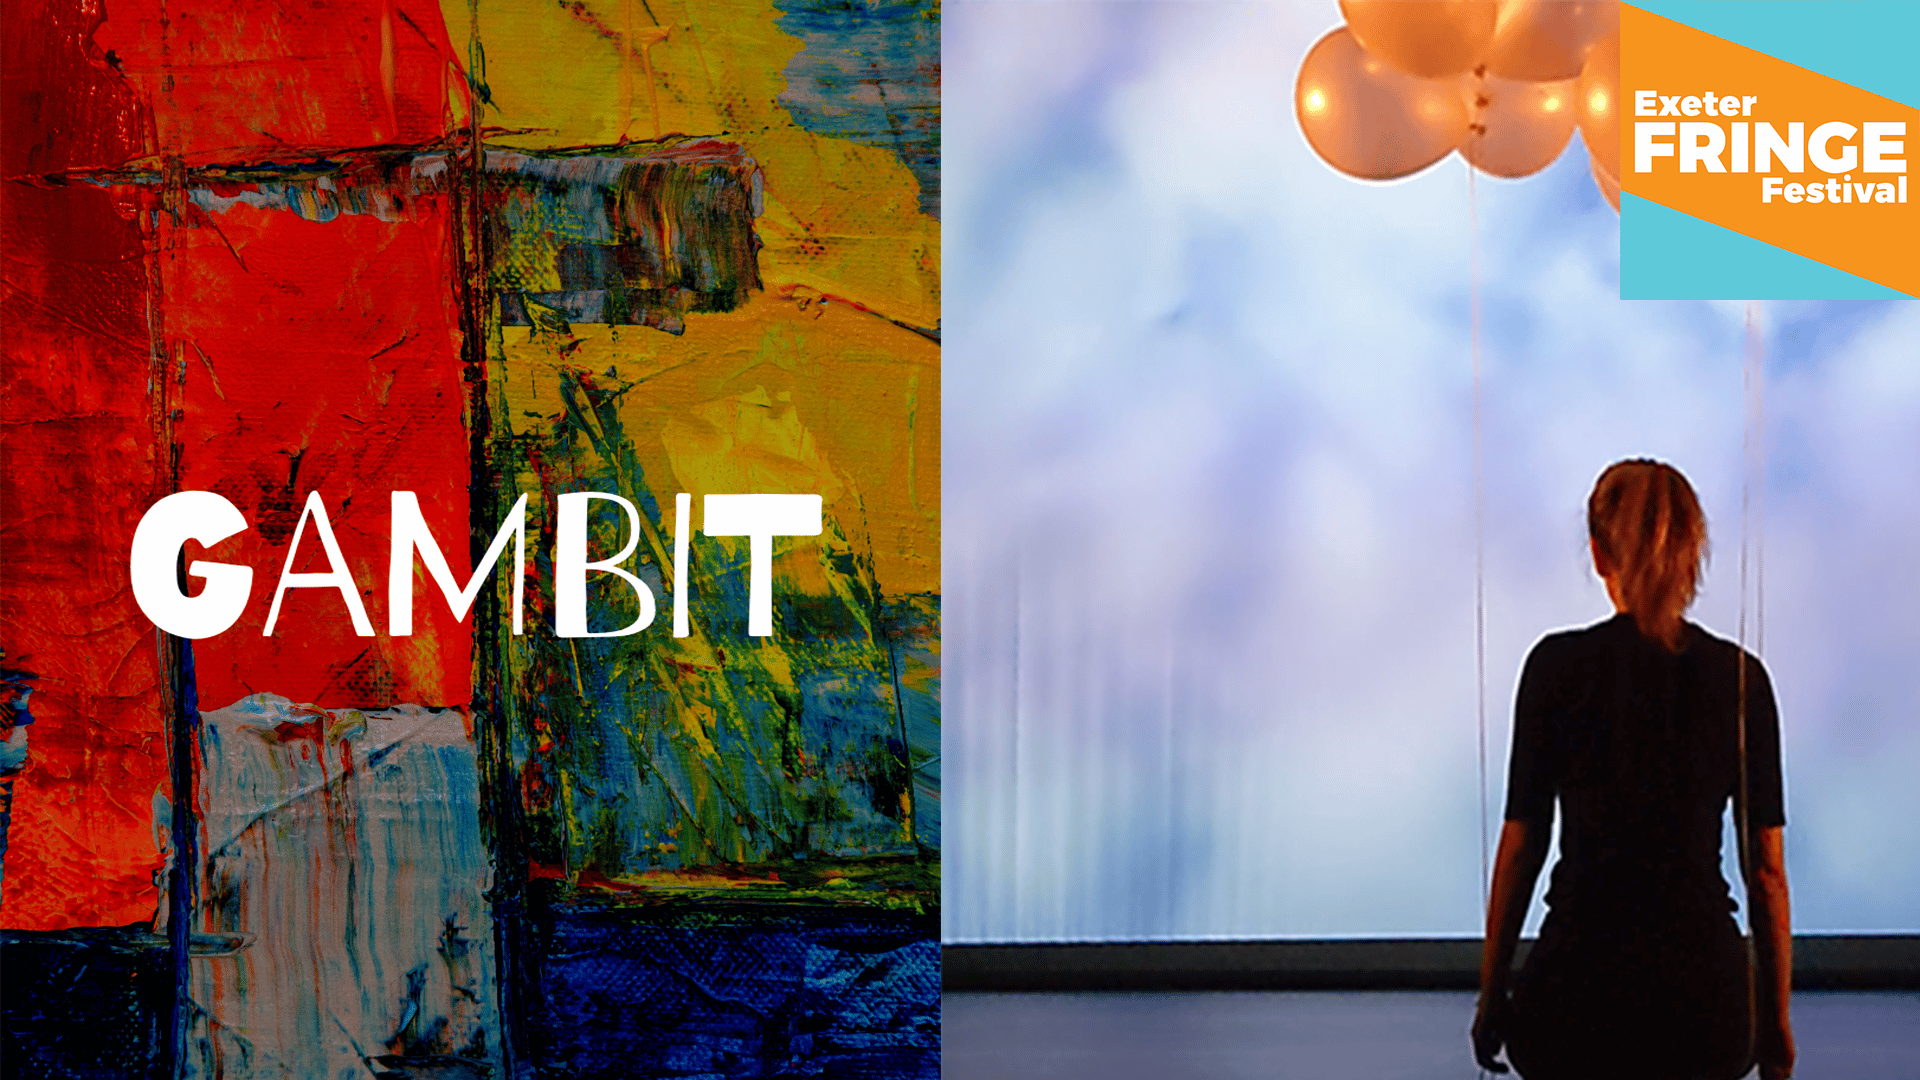 Marketing image for Gambit (textural painting with colourful planes and mixes) and Close Enough (a girl with a ponytail standing in front of clouds, her back to us, orange balloons in her hands)